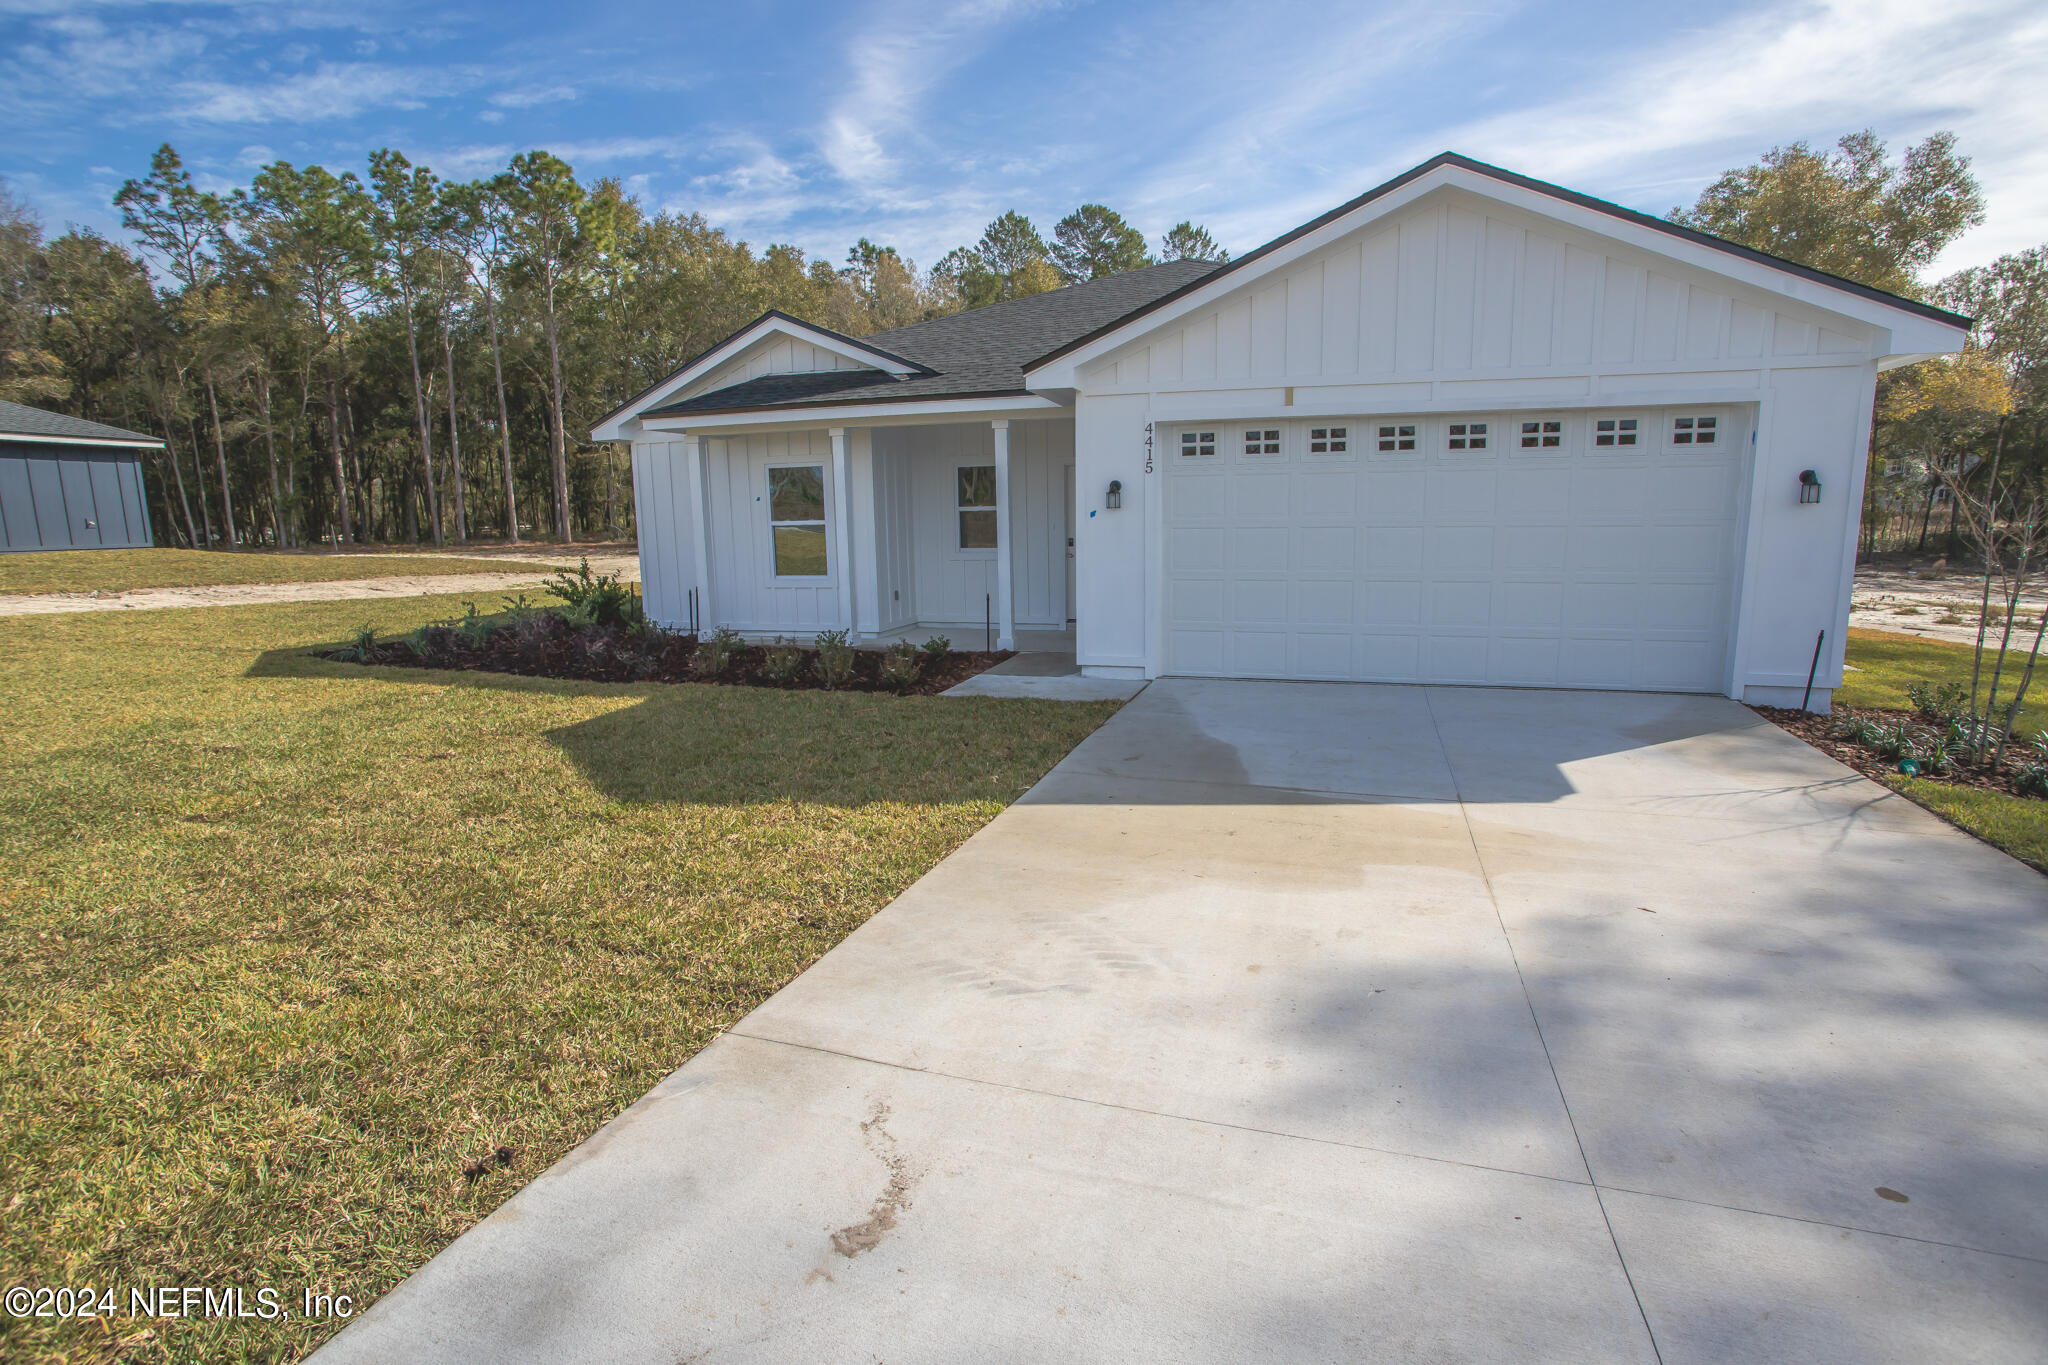 Keystone Heights, FL home for sale located at 4415 SE 8th Avenue, Keystone Heights, FL 32656